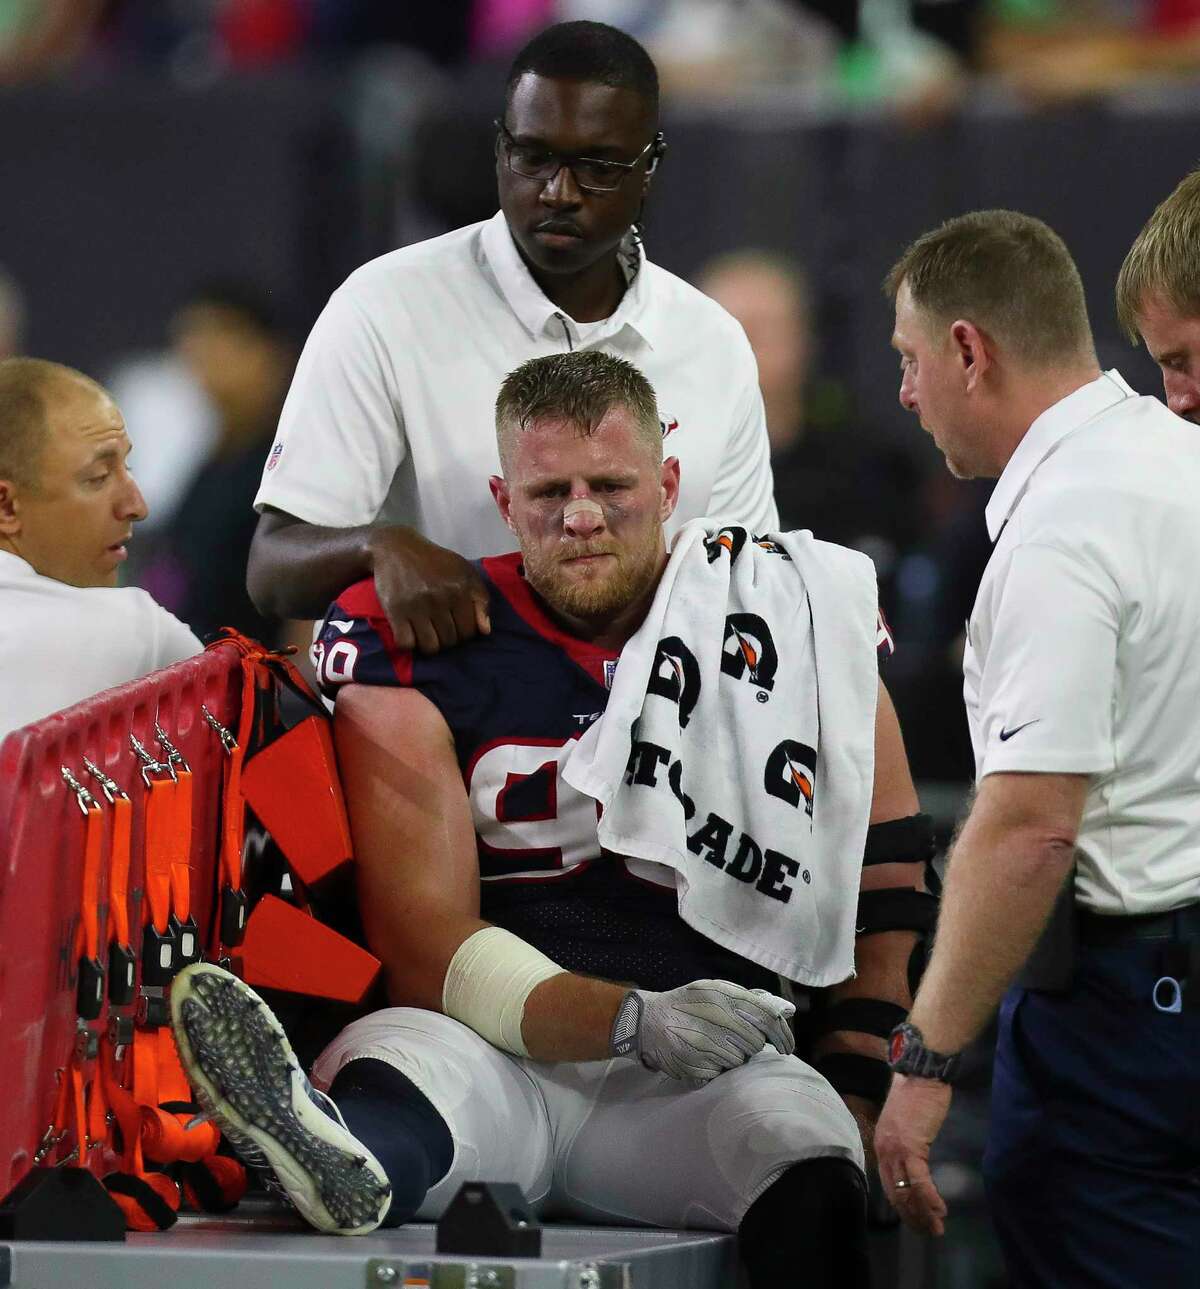 Texans defensive end J.J. Watt went out with a broken leg during a game against the Chiefs on Oct. 8.